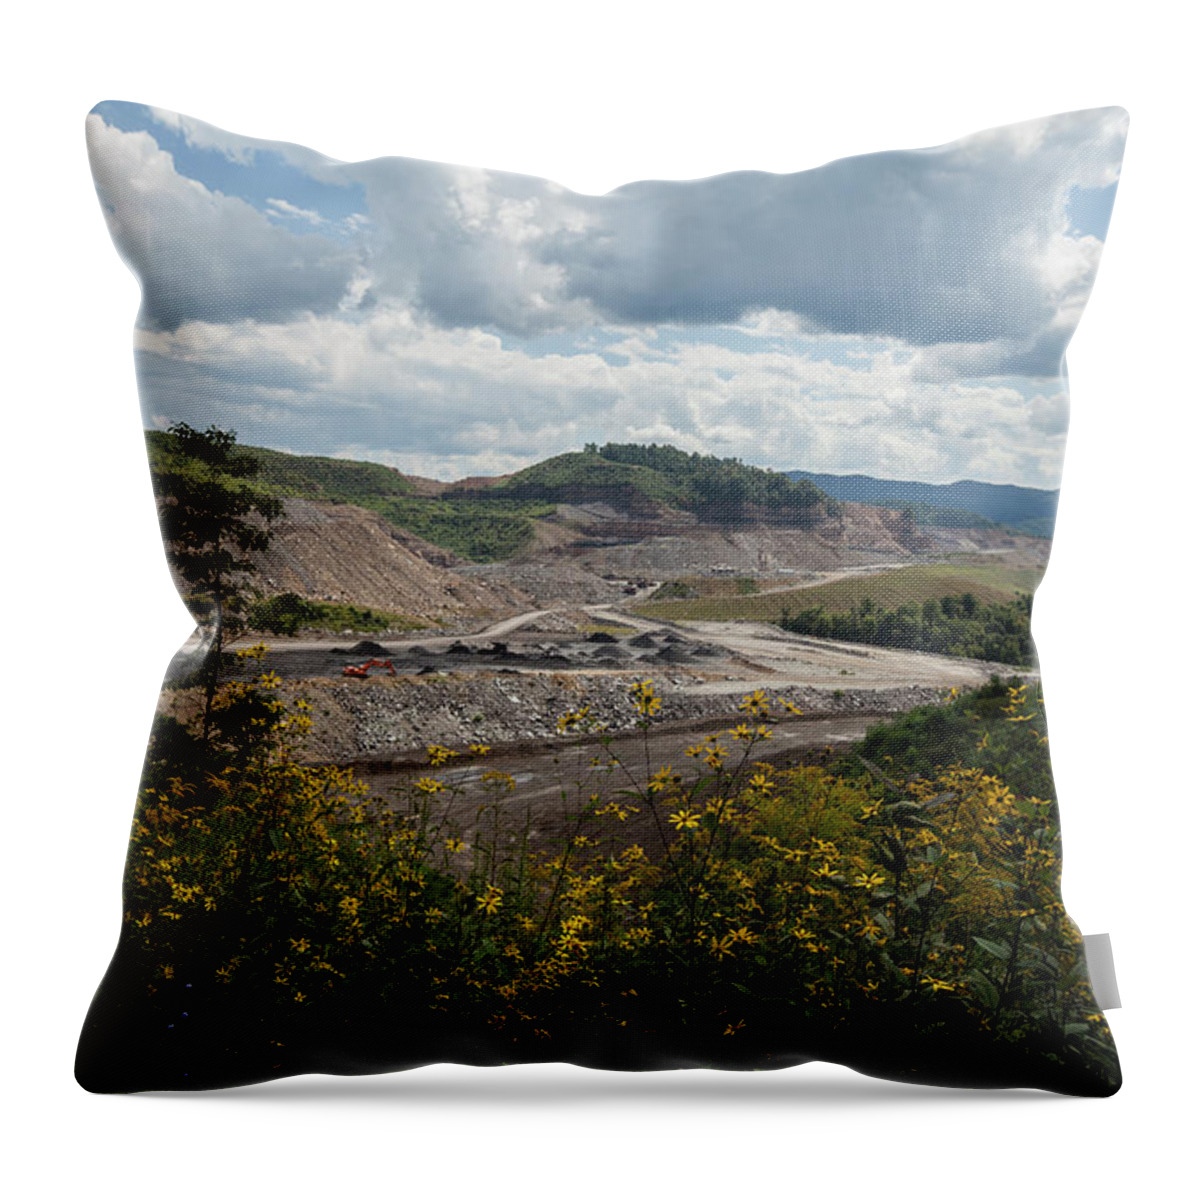 Scenics Throw Pillow featuring the photograph Mountaintop Removal Coal Mining by Jerry Whaley